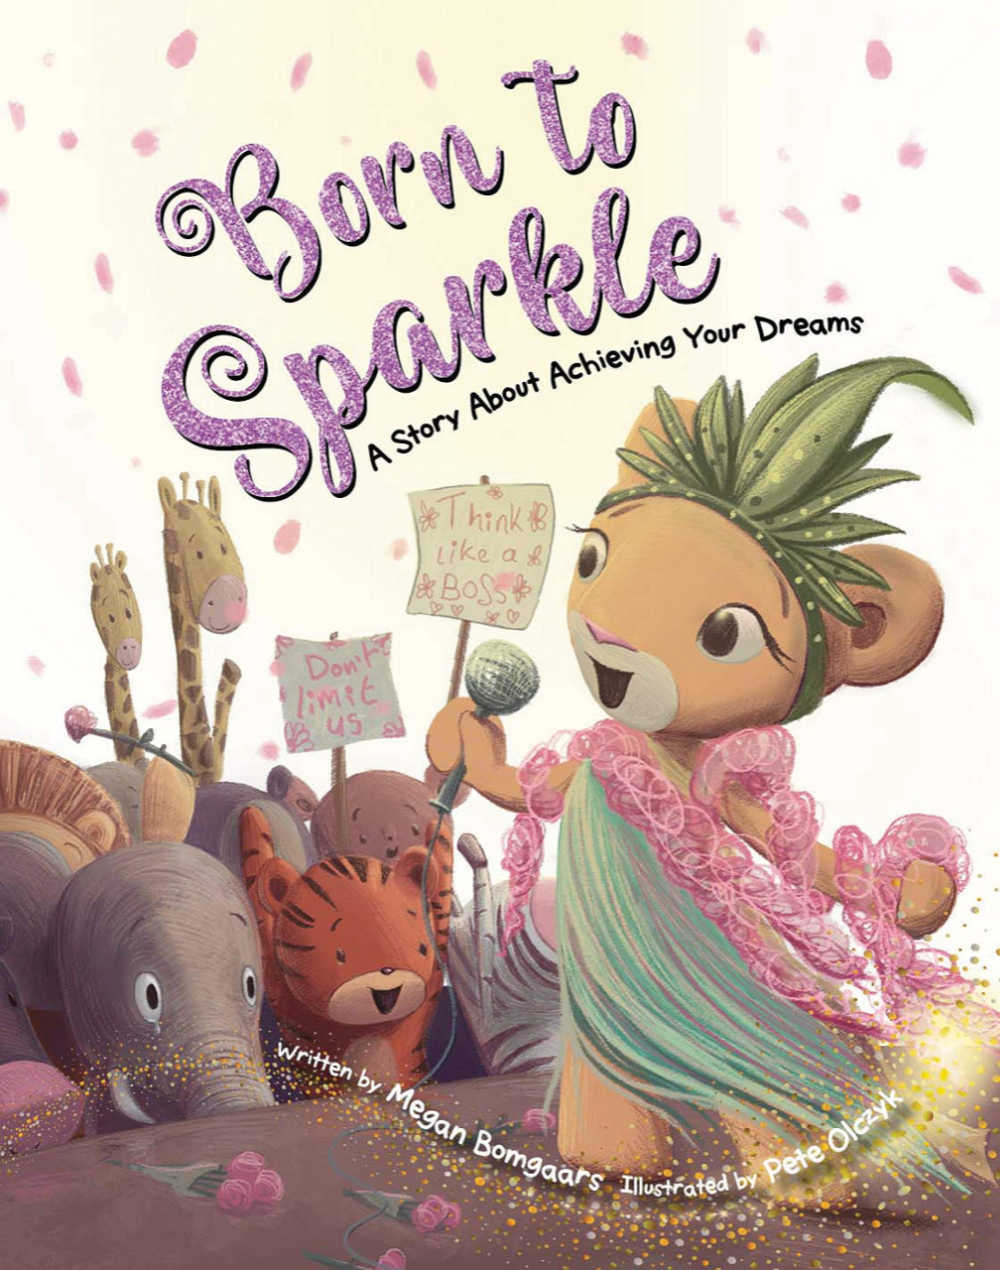 Kids will love it, when you gift them the new illustrated Flower Pot Press books, Born to Sparkle and The Book of Hugs. 